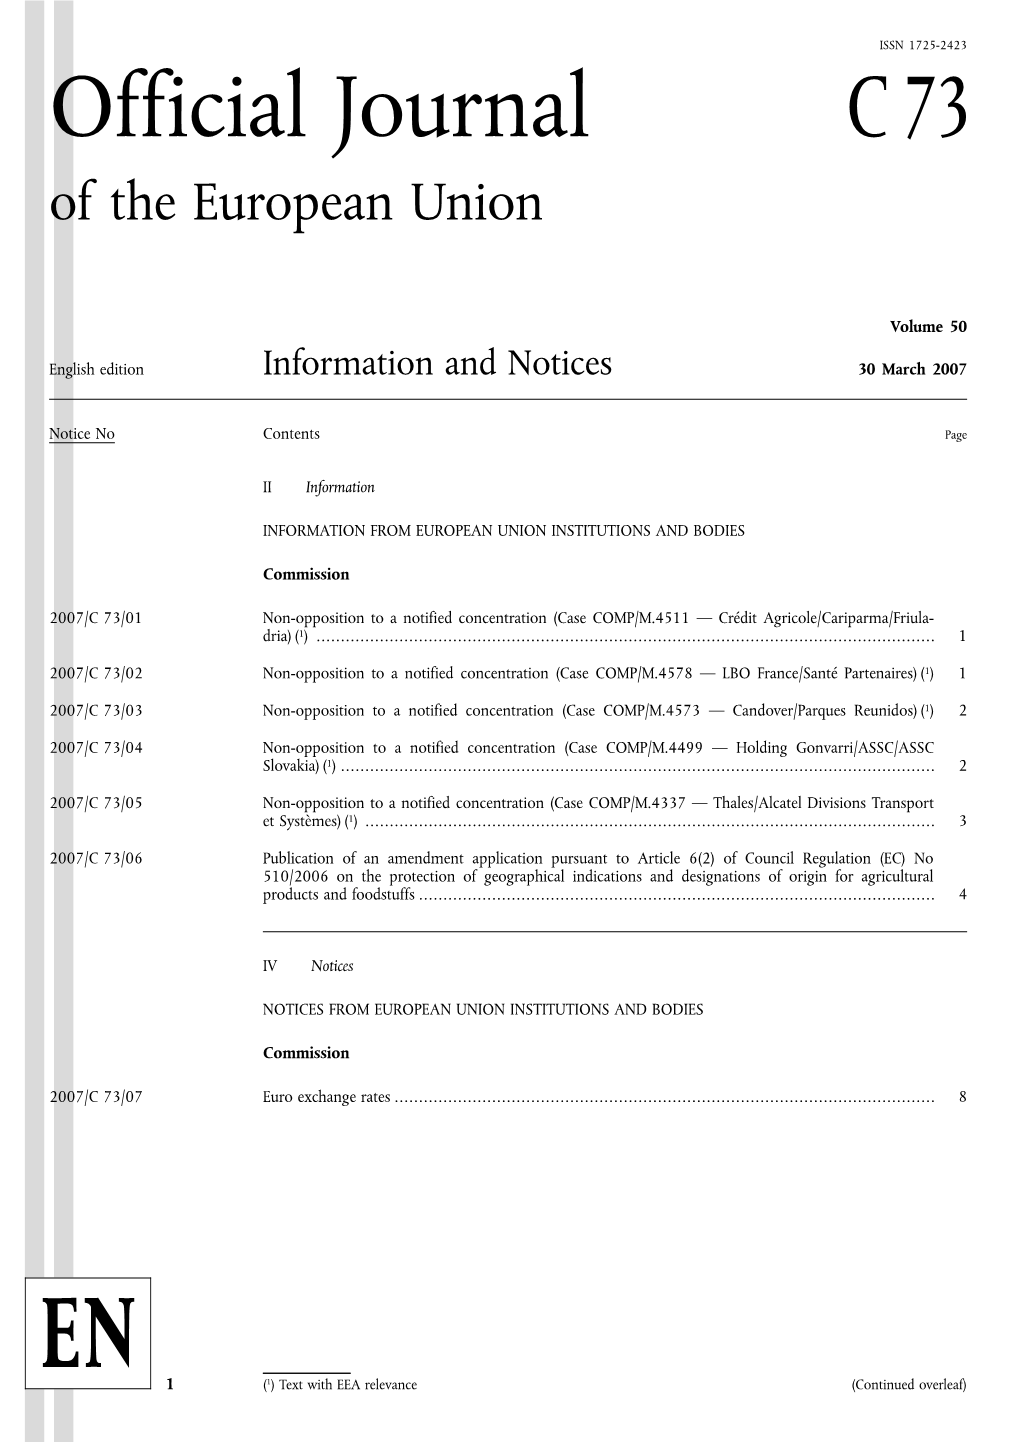 Official Journal C 73 of the European Union